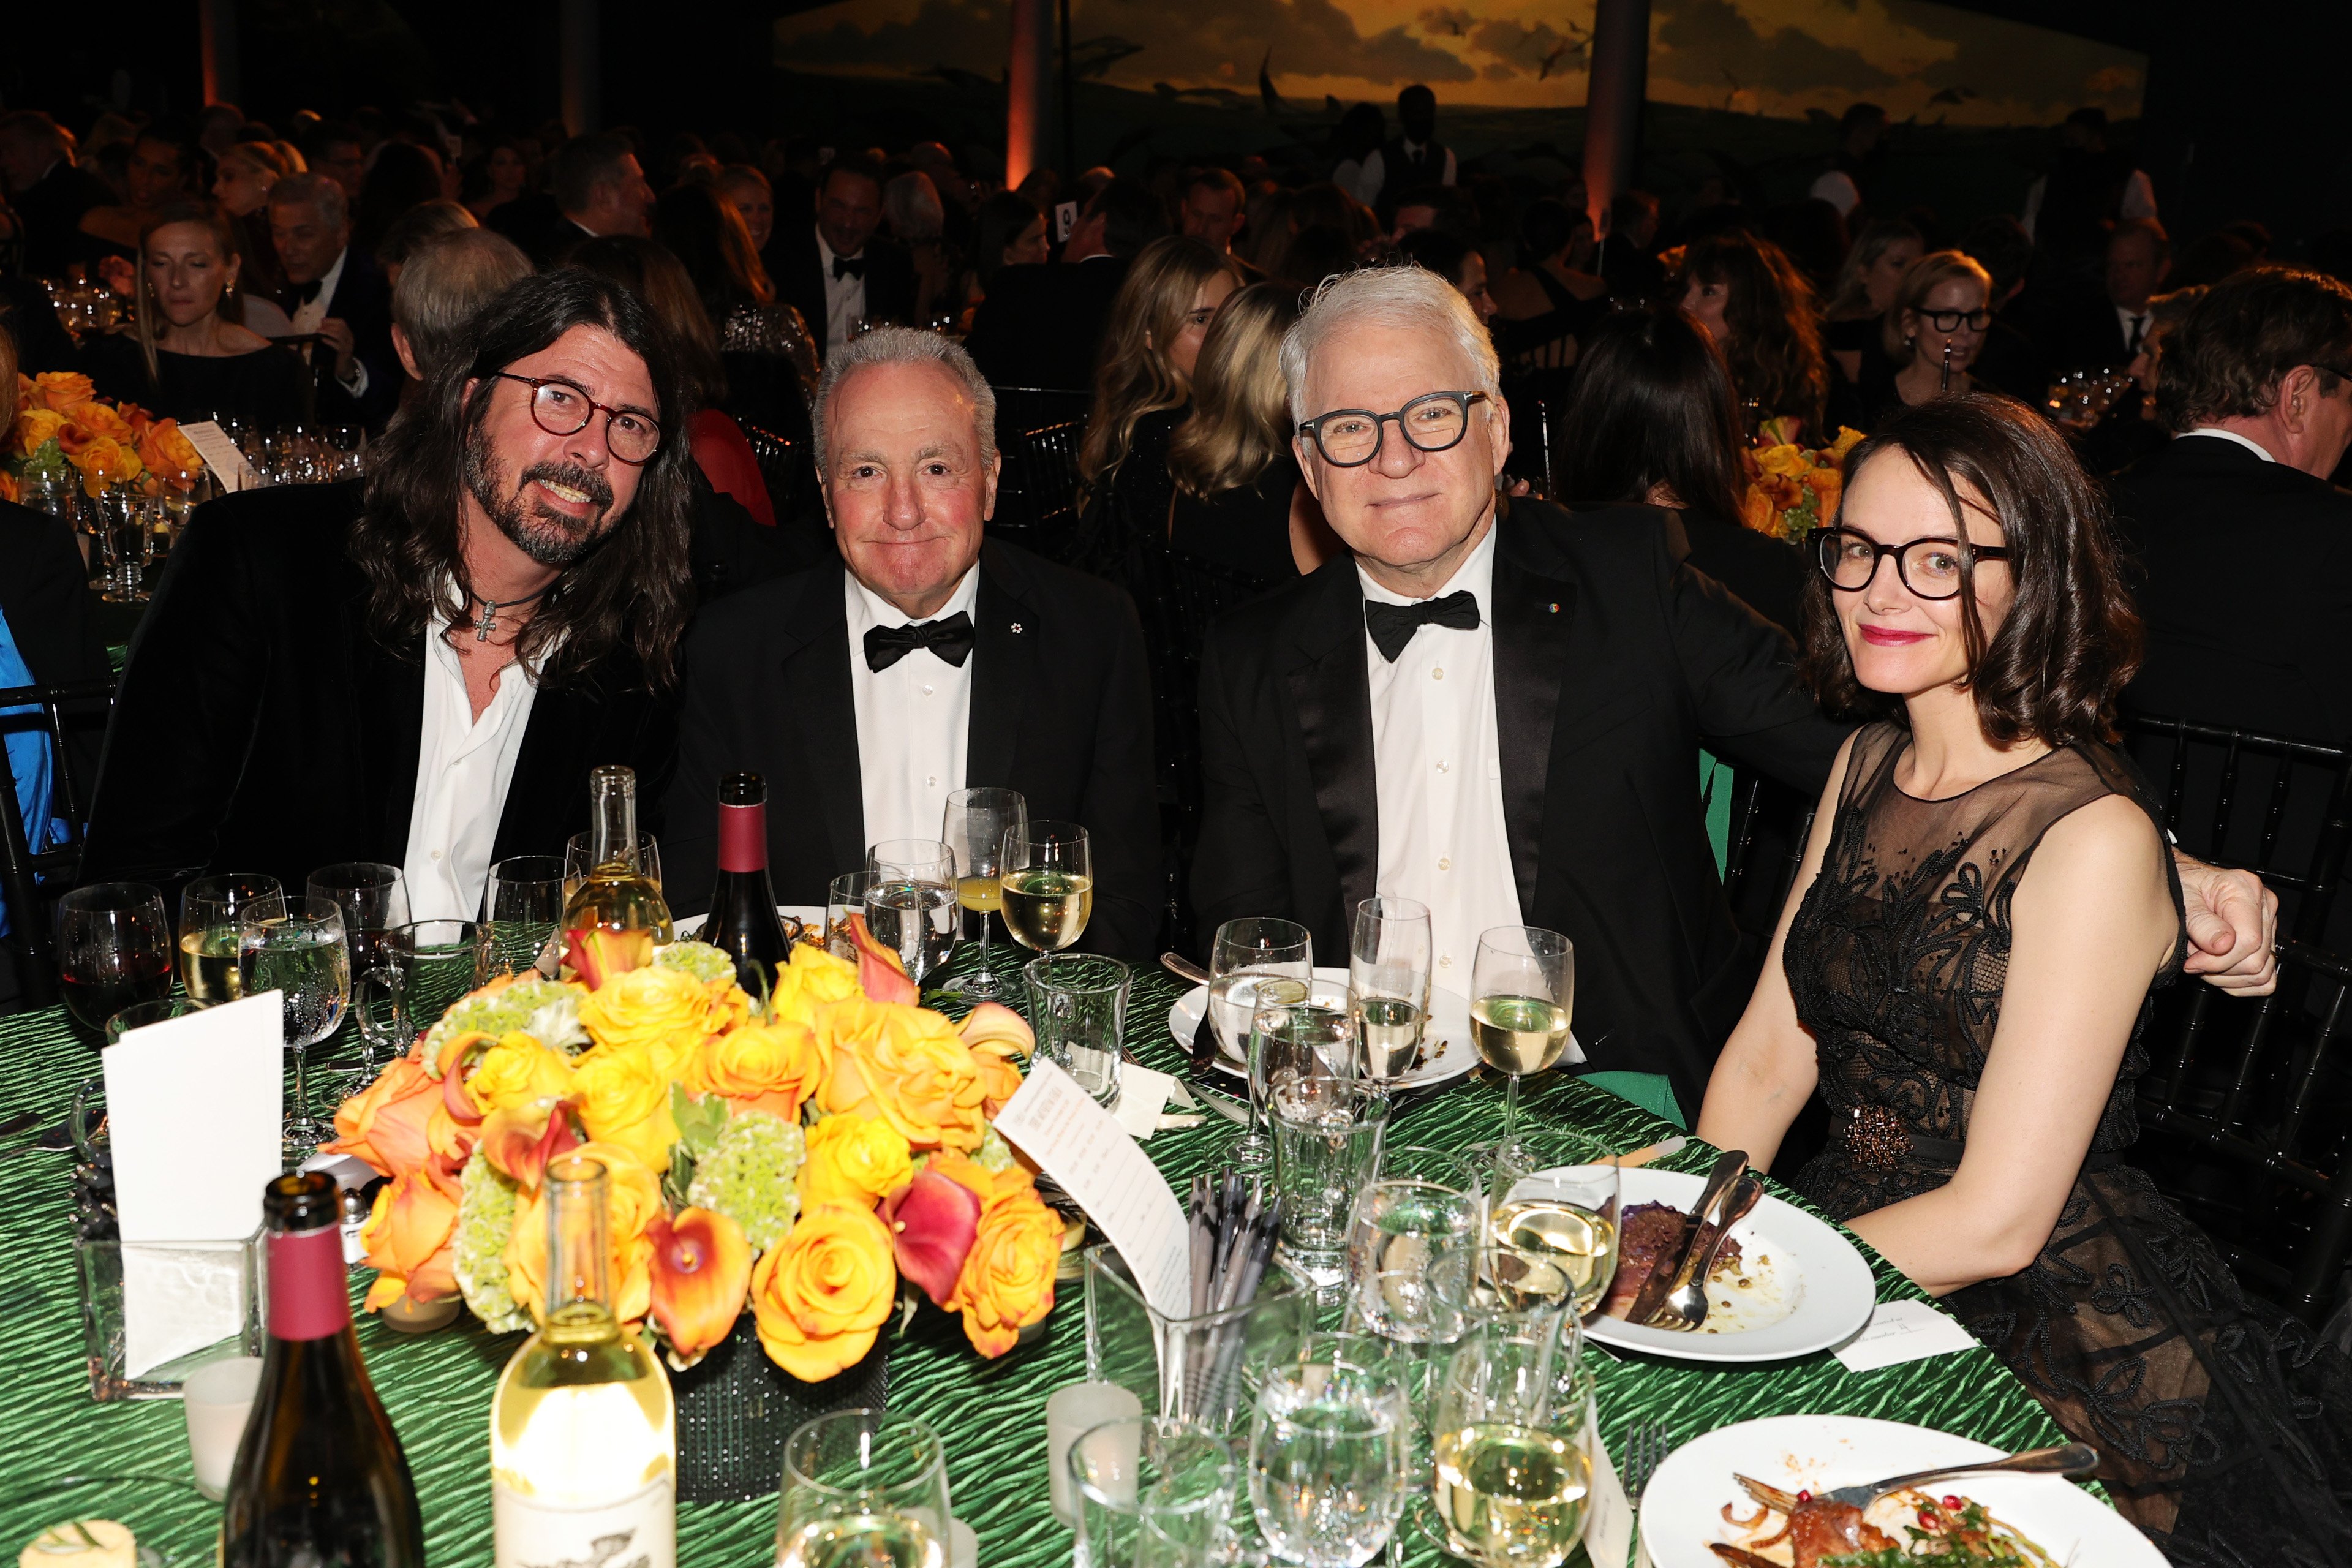 Dave Grohl, Lorne Michaels, Steve Martin and Anne Stringfield attend the American Museum of Natural History Gala 2021 on November 18, 2021, in New York City. | Source: Getty Images